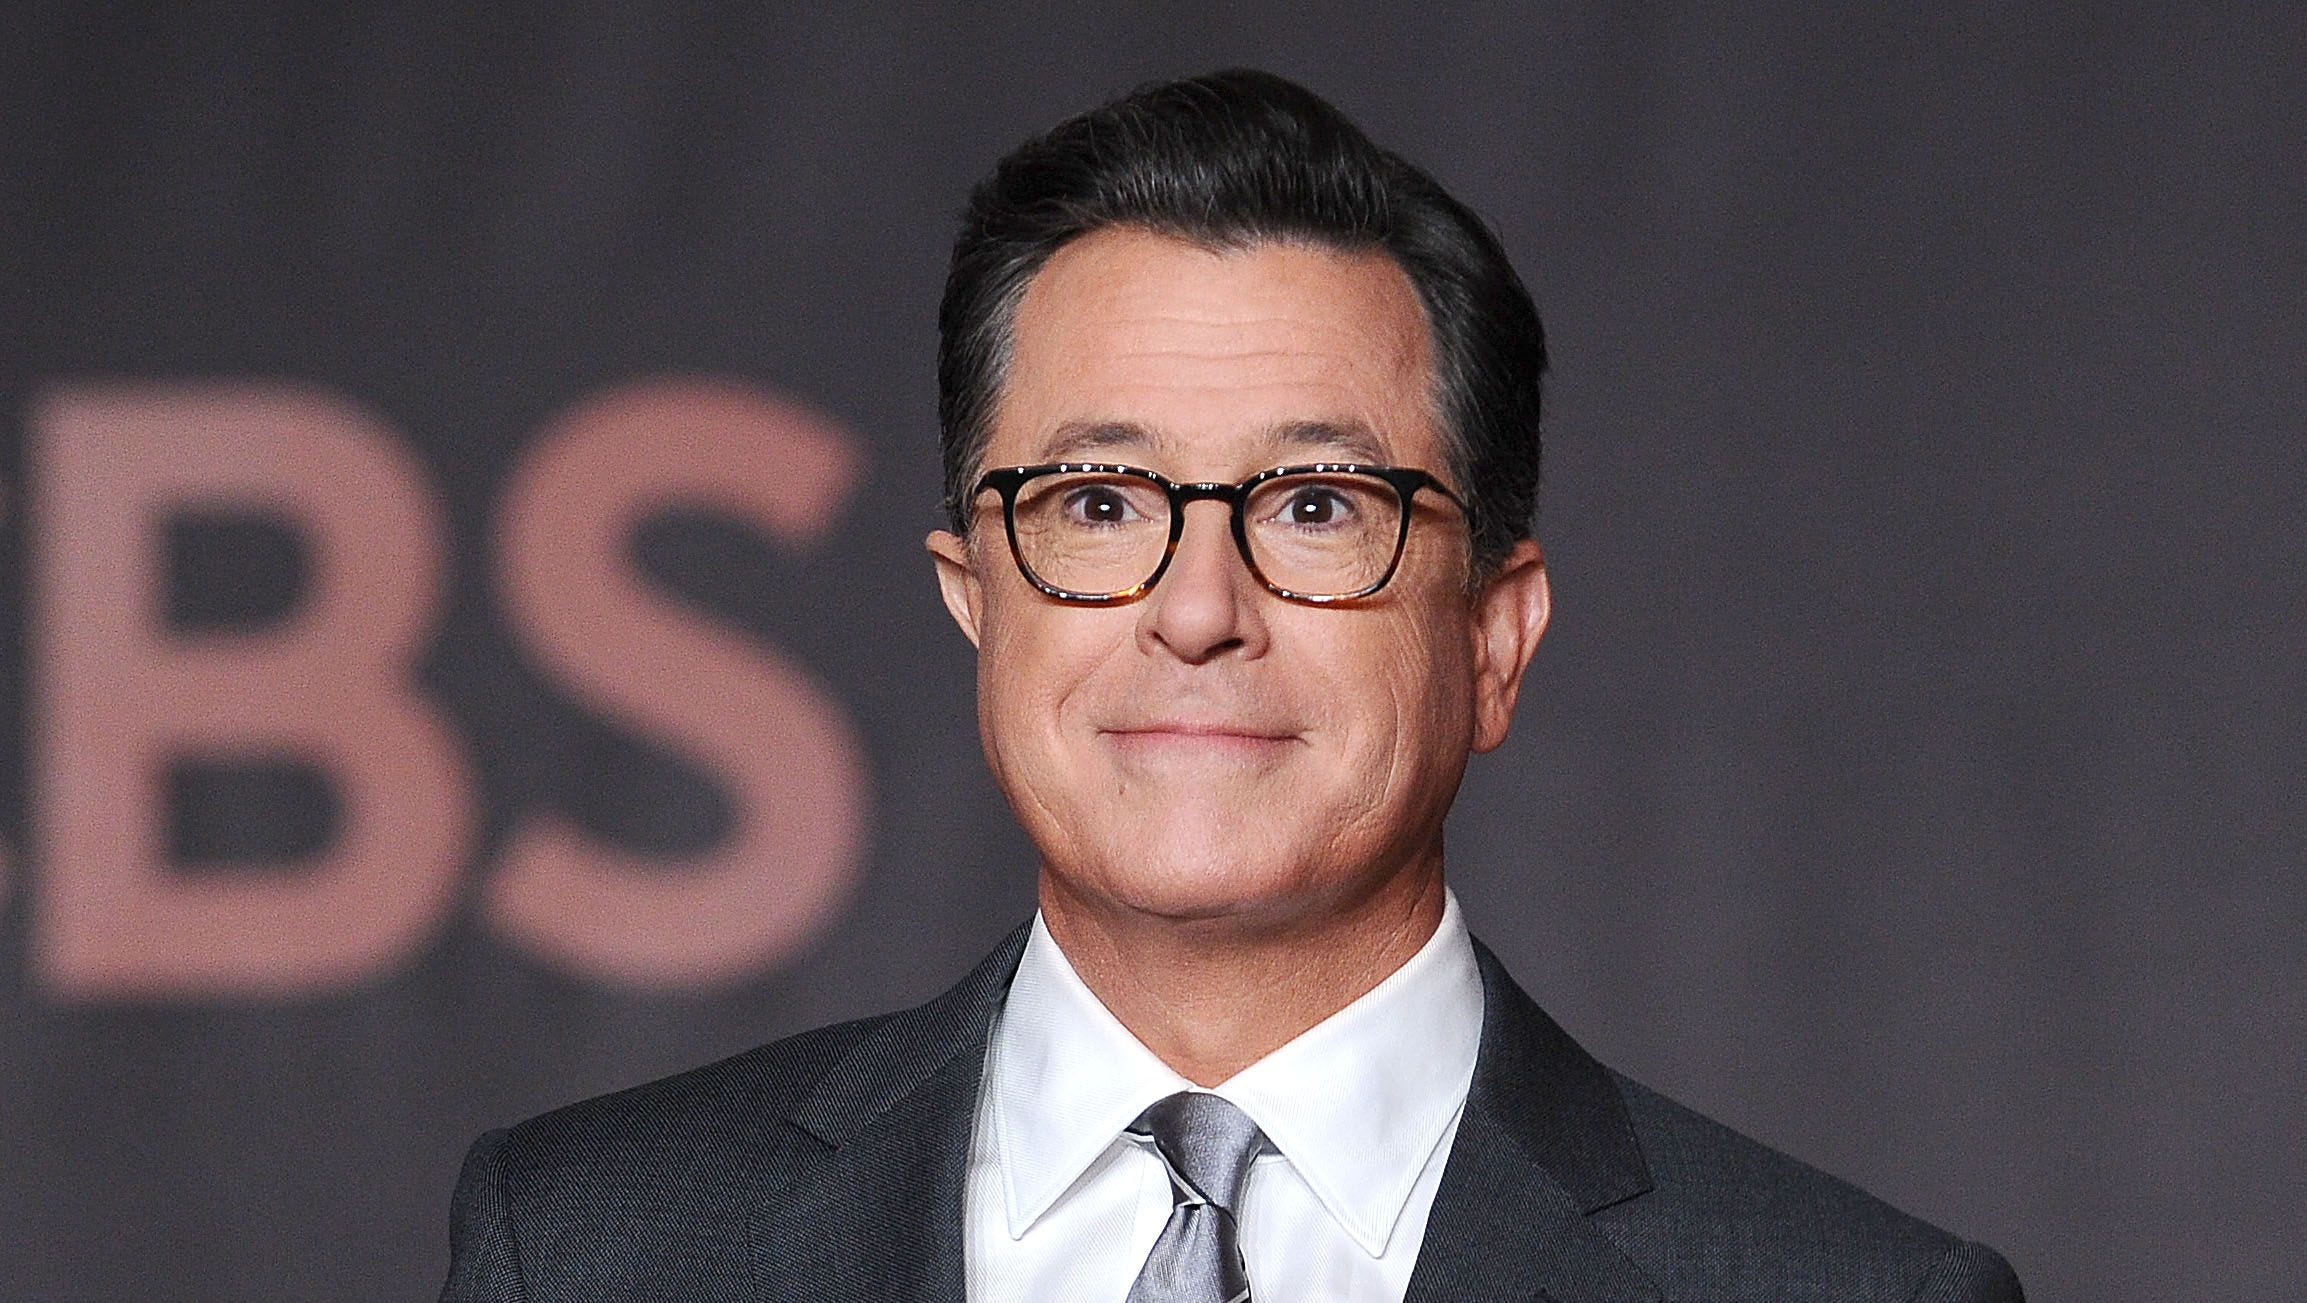 Stephen Colbert, Trevor Noah laugh about Trump's feud with the Eagles.